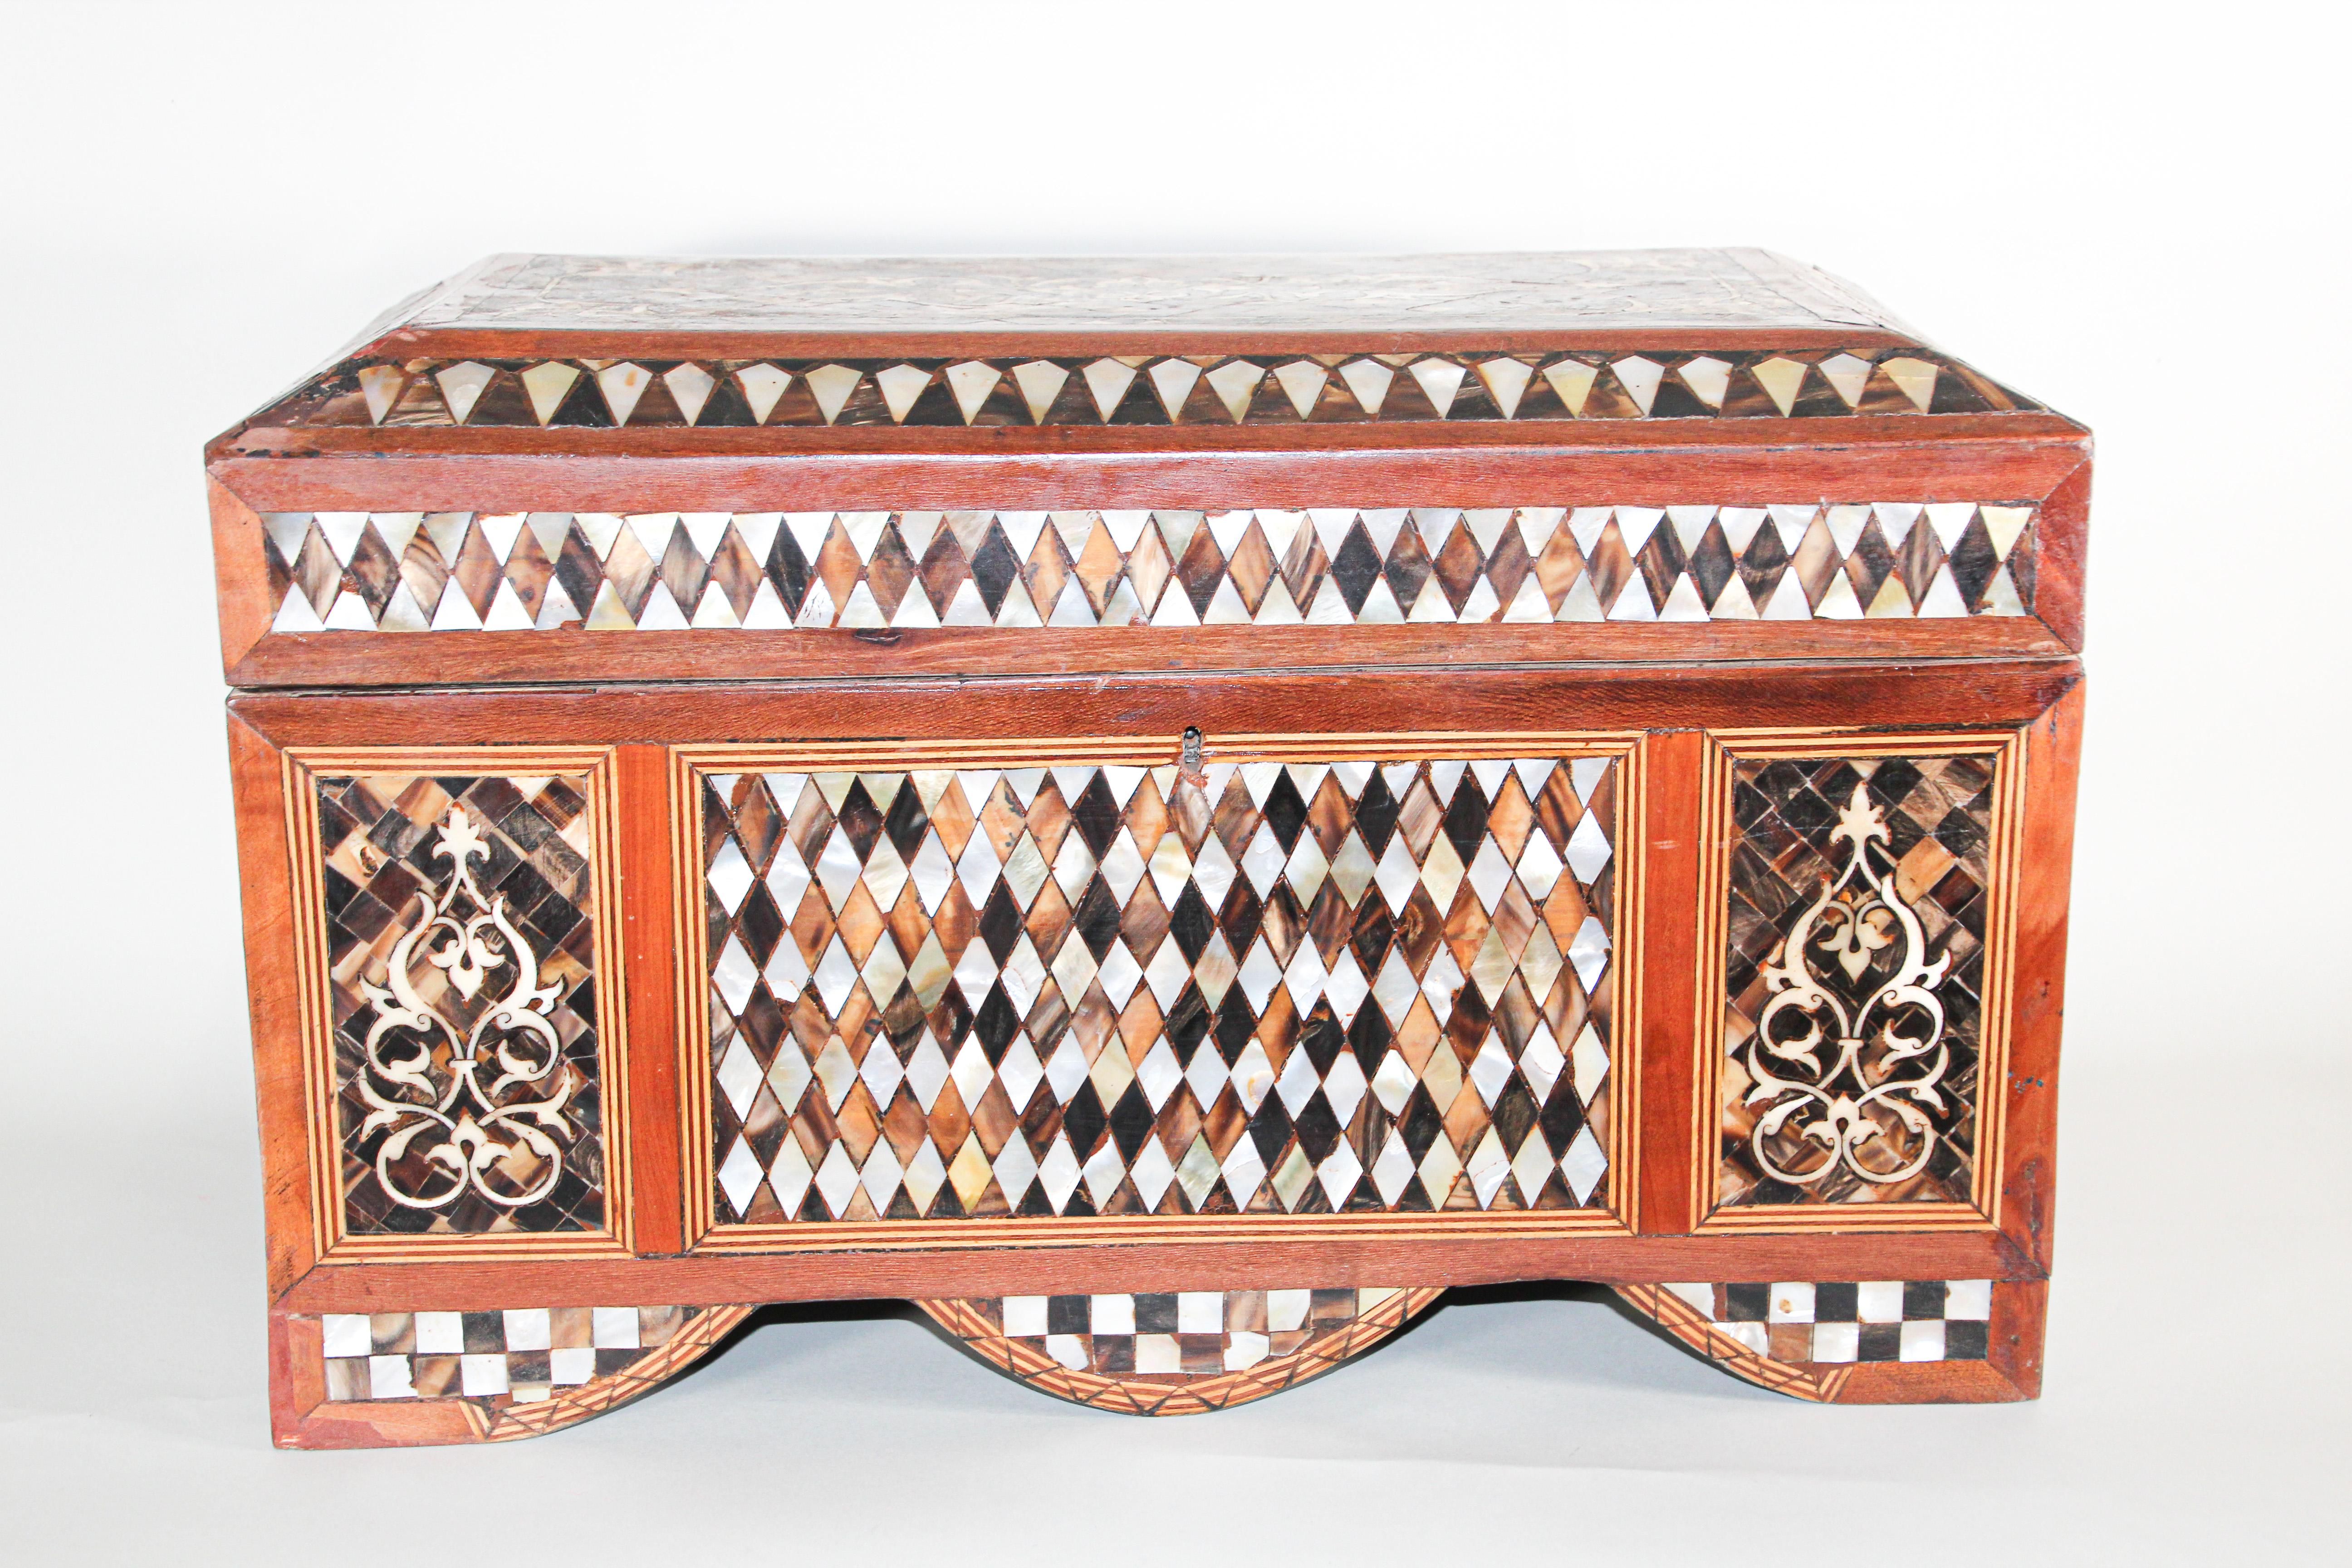 A rare large handcrafted Moorish jewelry wedding box with mother of pearl inlay.
A circa 1900 Turkish mother of pearl inlaid chest inlaid throughout to show foliate scrolls and geometric forms.
From the 16th century onwards the dominant influences